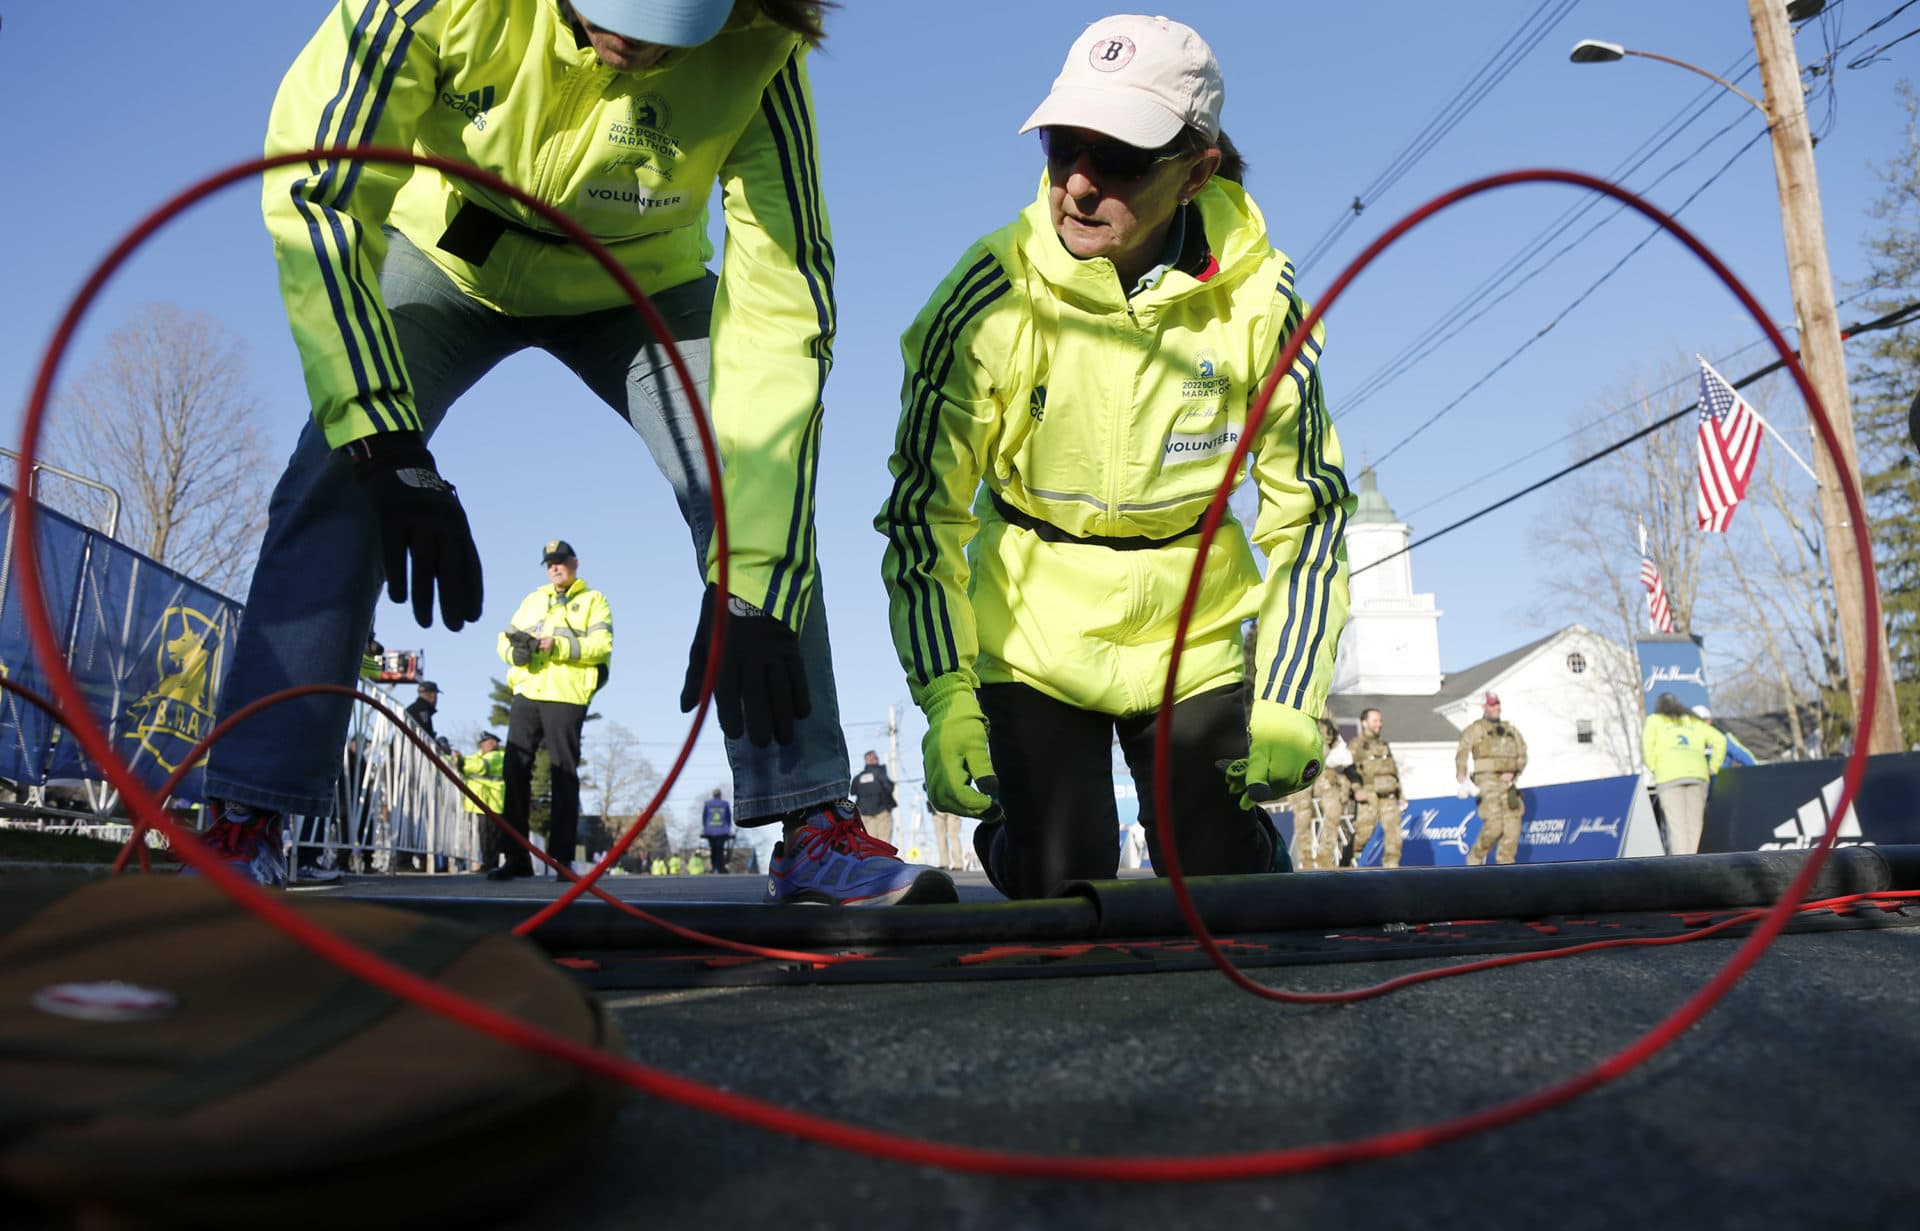 Volunteers set up the timing mats at the starting line before the start of the 126th Boston Marathon, Monday, April 18, 2022, in Hopkinton, Mass. (Mary Schwalm/AP)